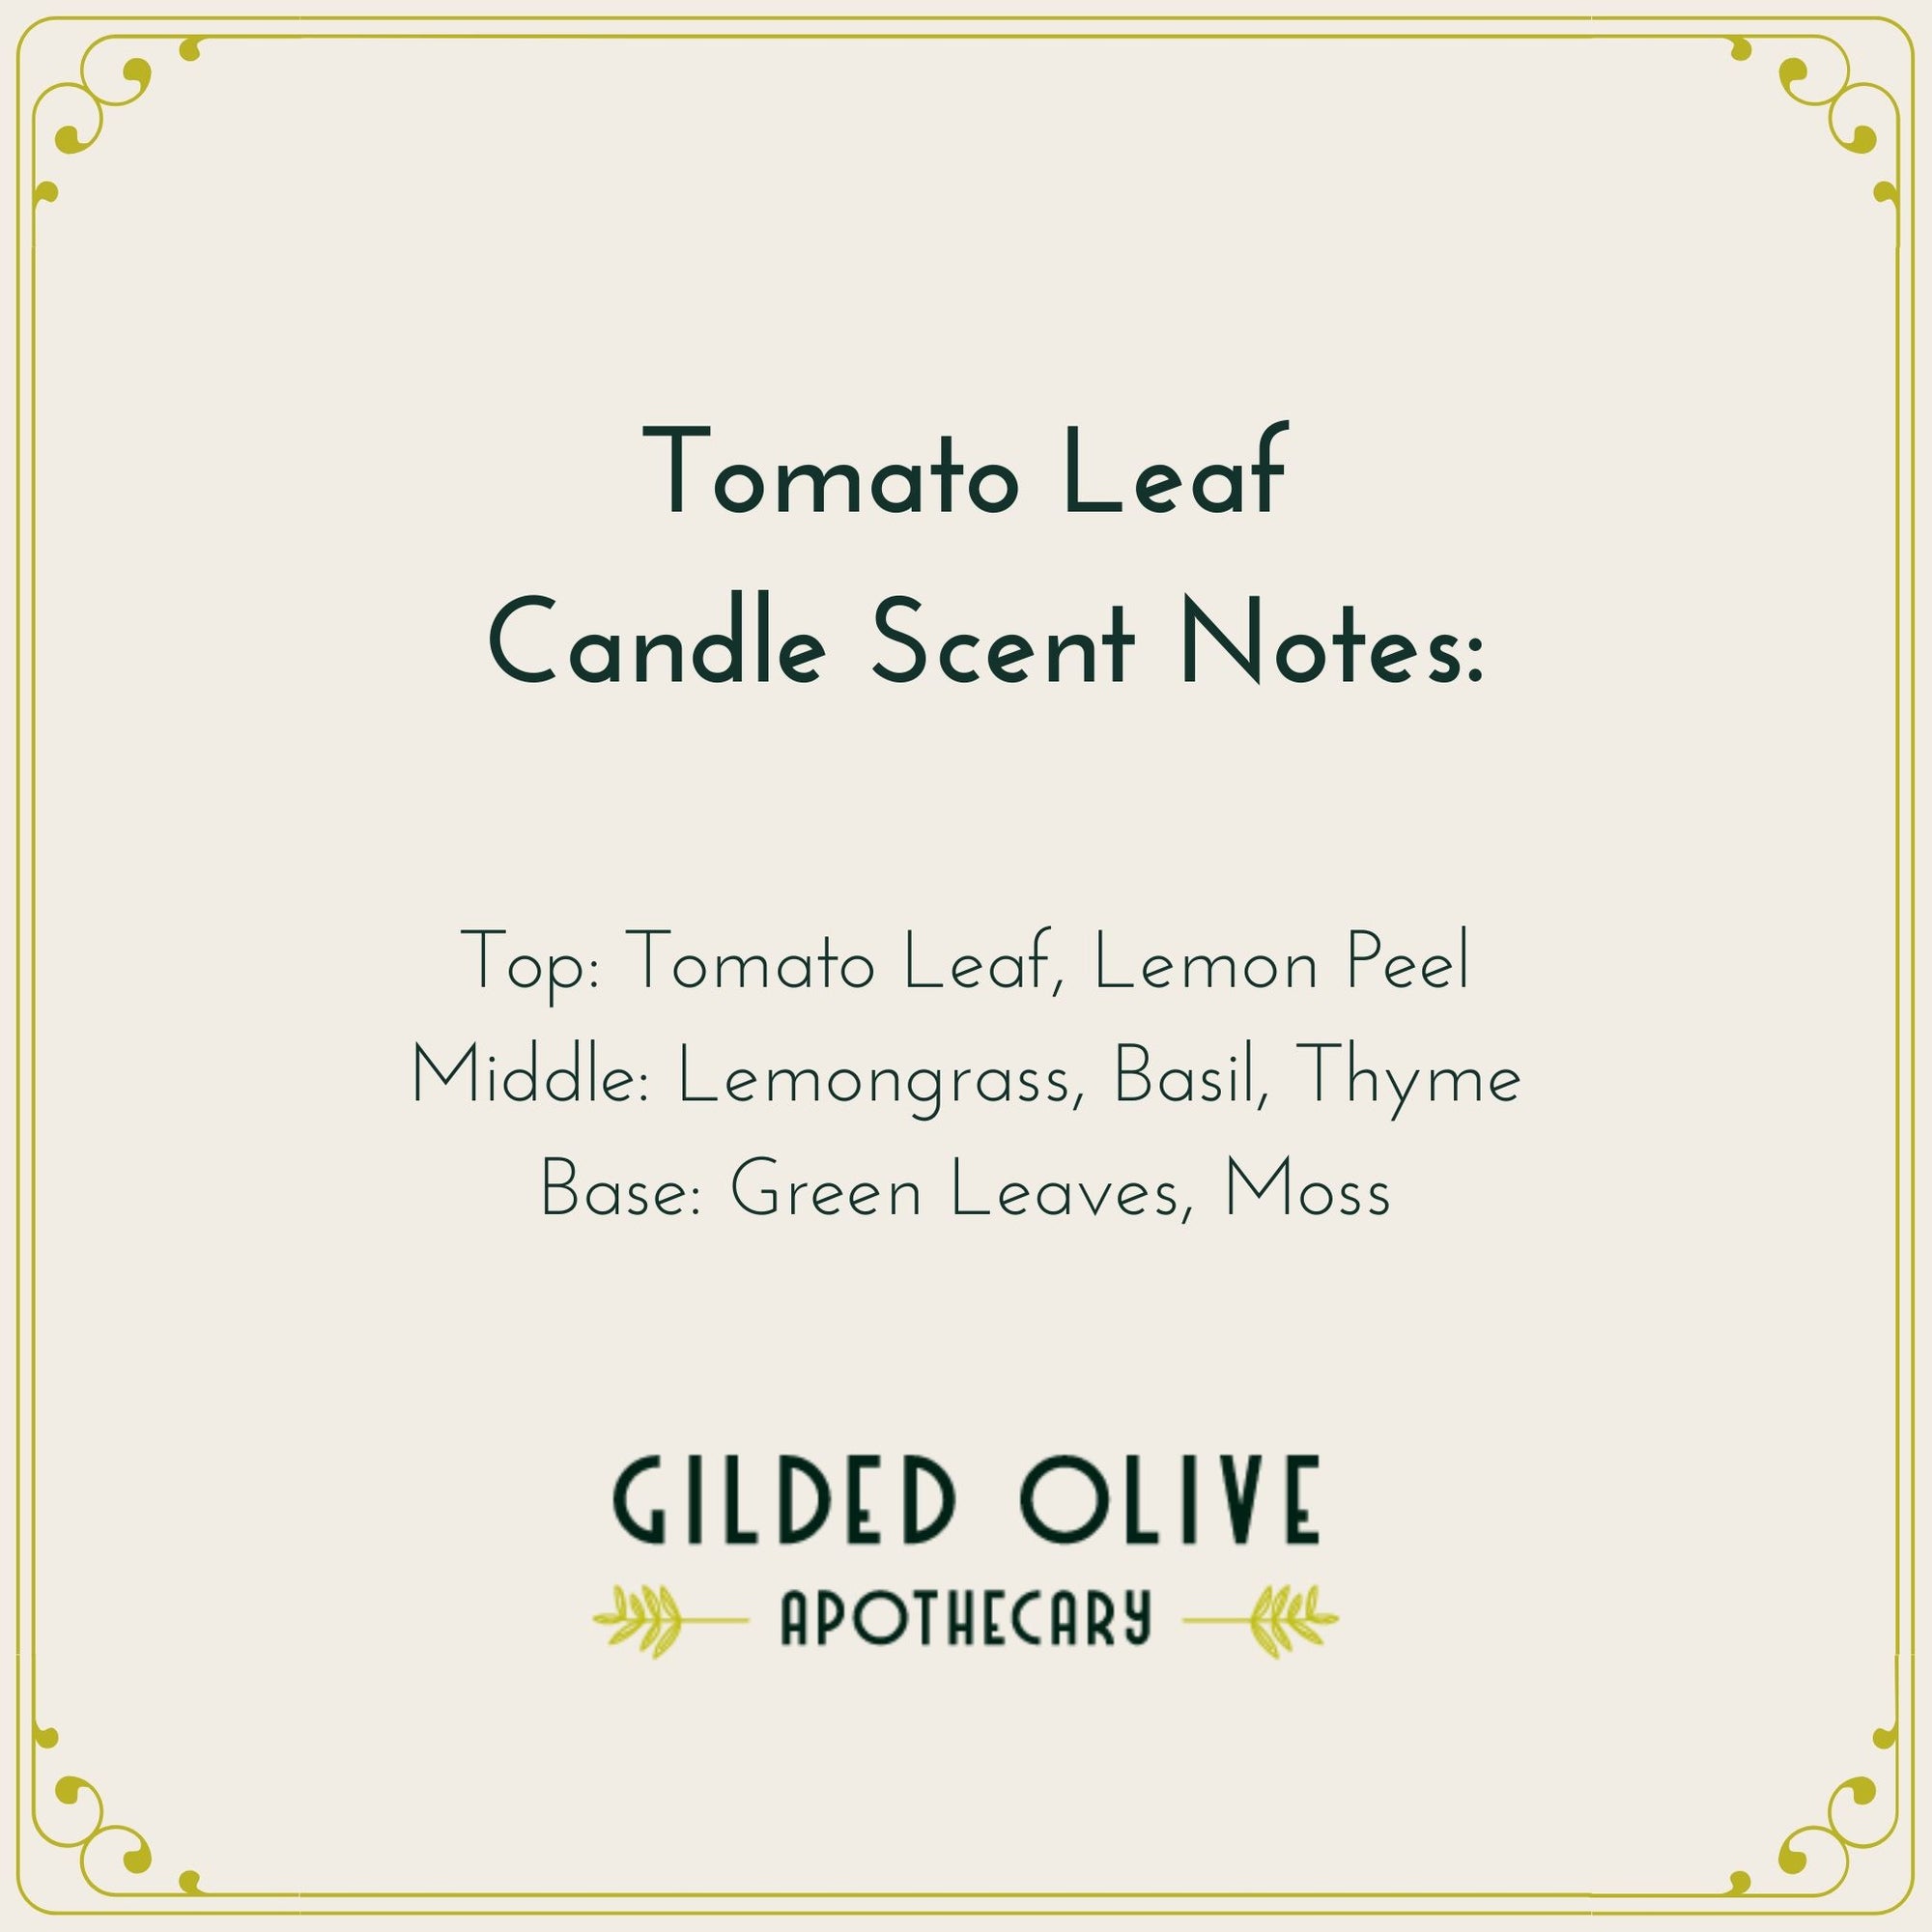 Tomato Leaf Candle Scent Notes